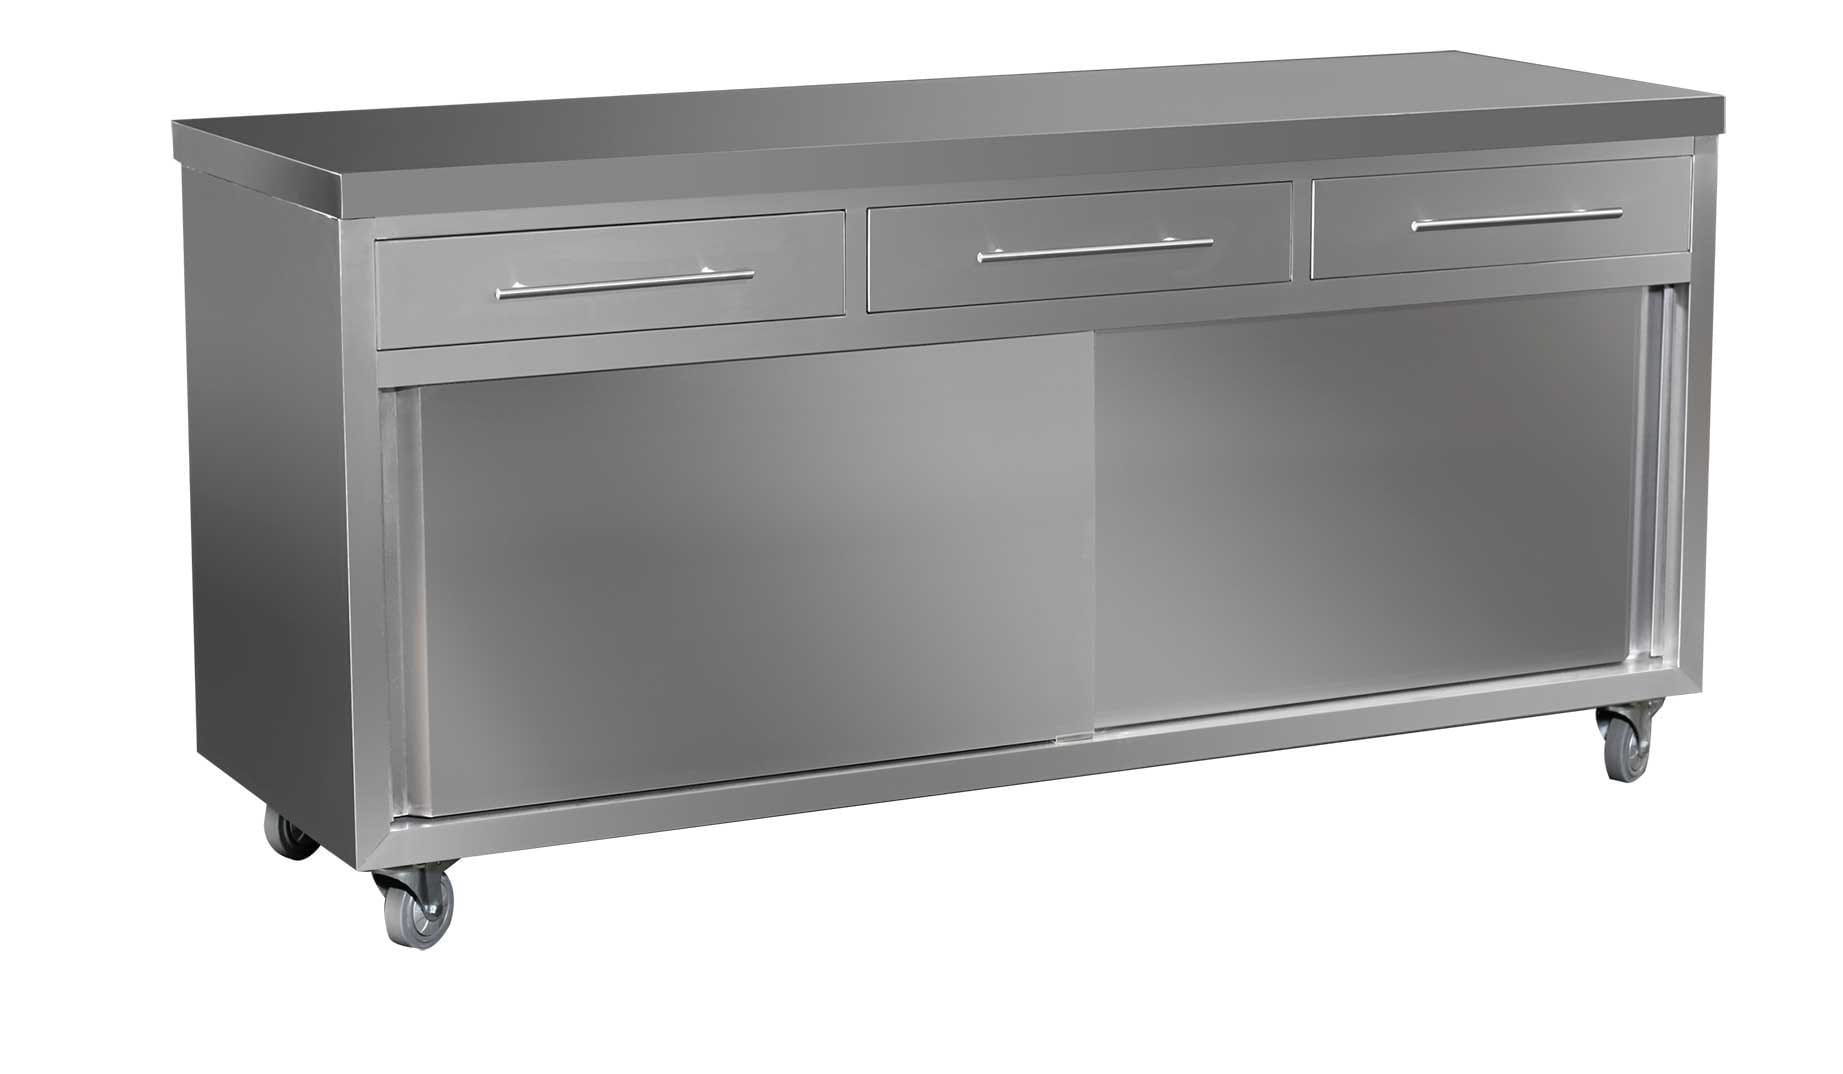 Stainless Steel Cabinets for Commercial Kitchens, 1800 x 610 x 900mm high.